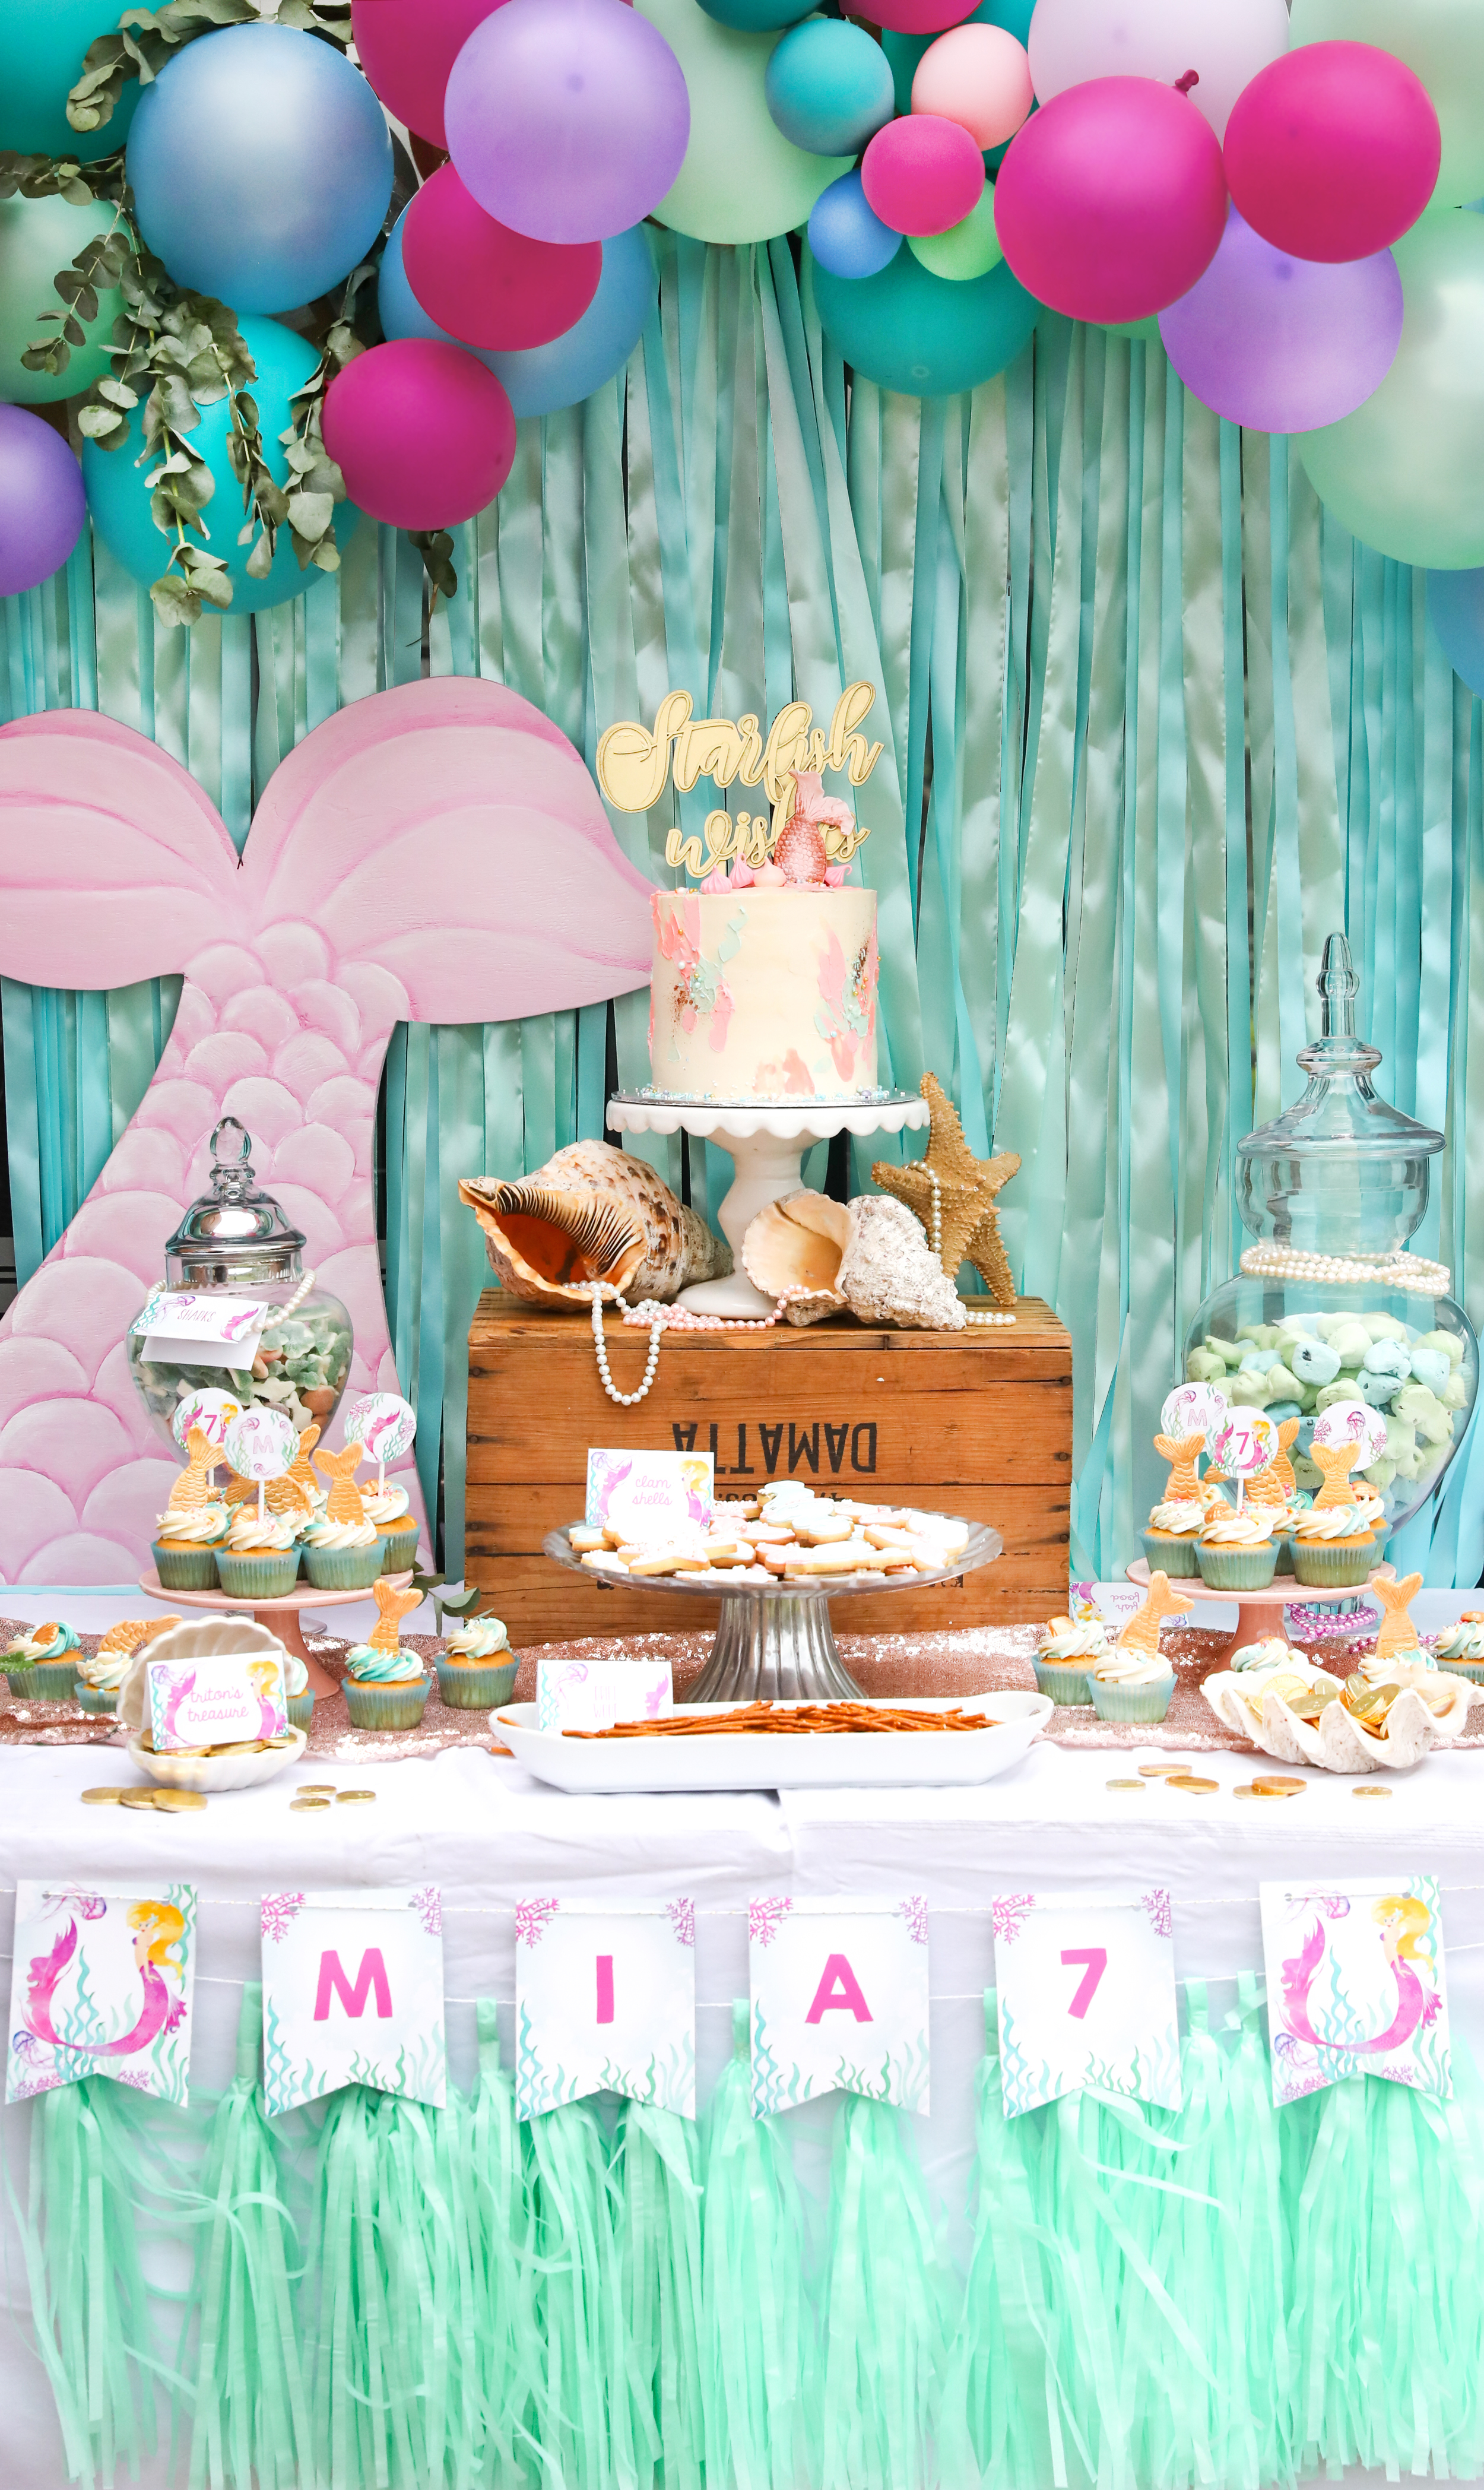 The prettiest pink and teal watercolor Mermaid party set - instant download, edit and print!